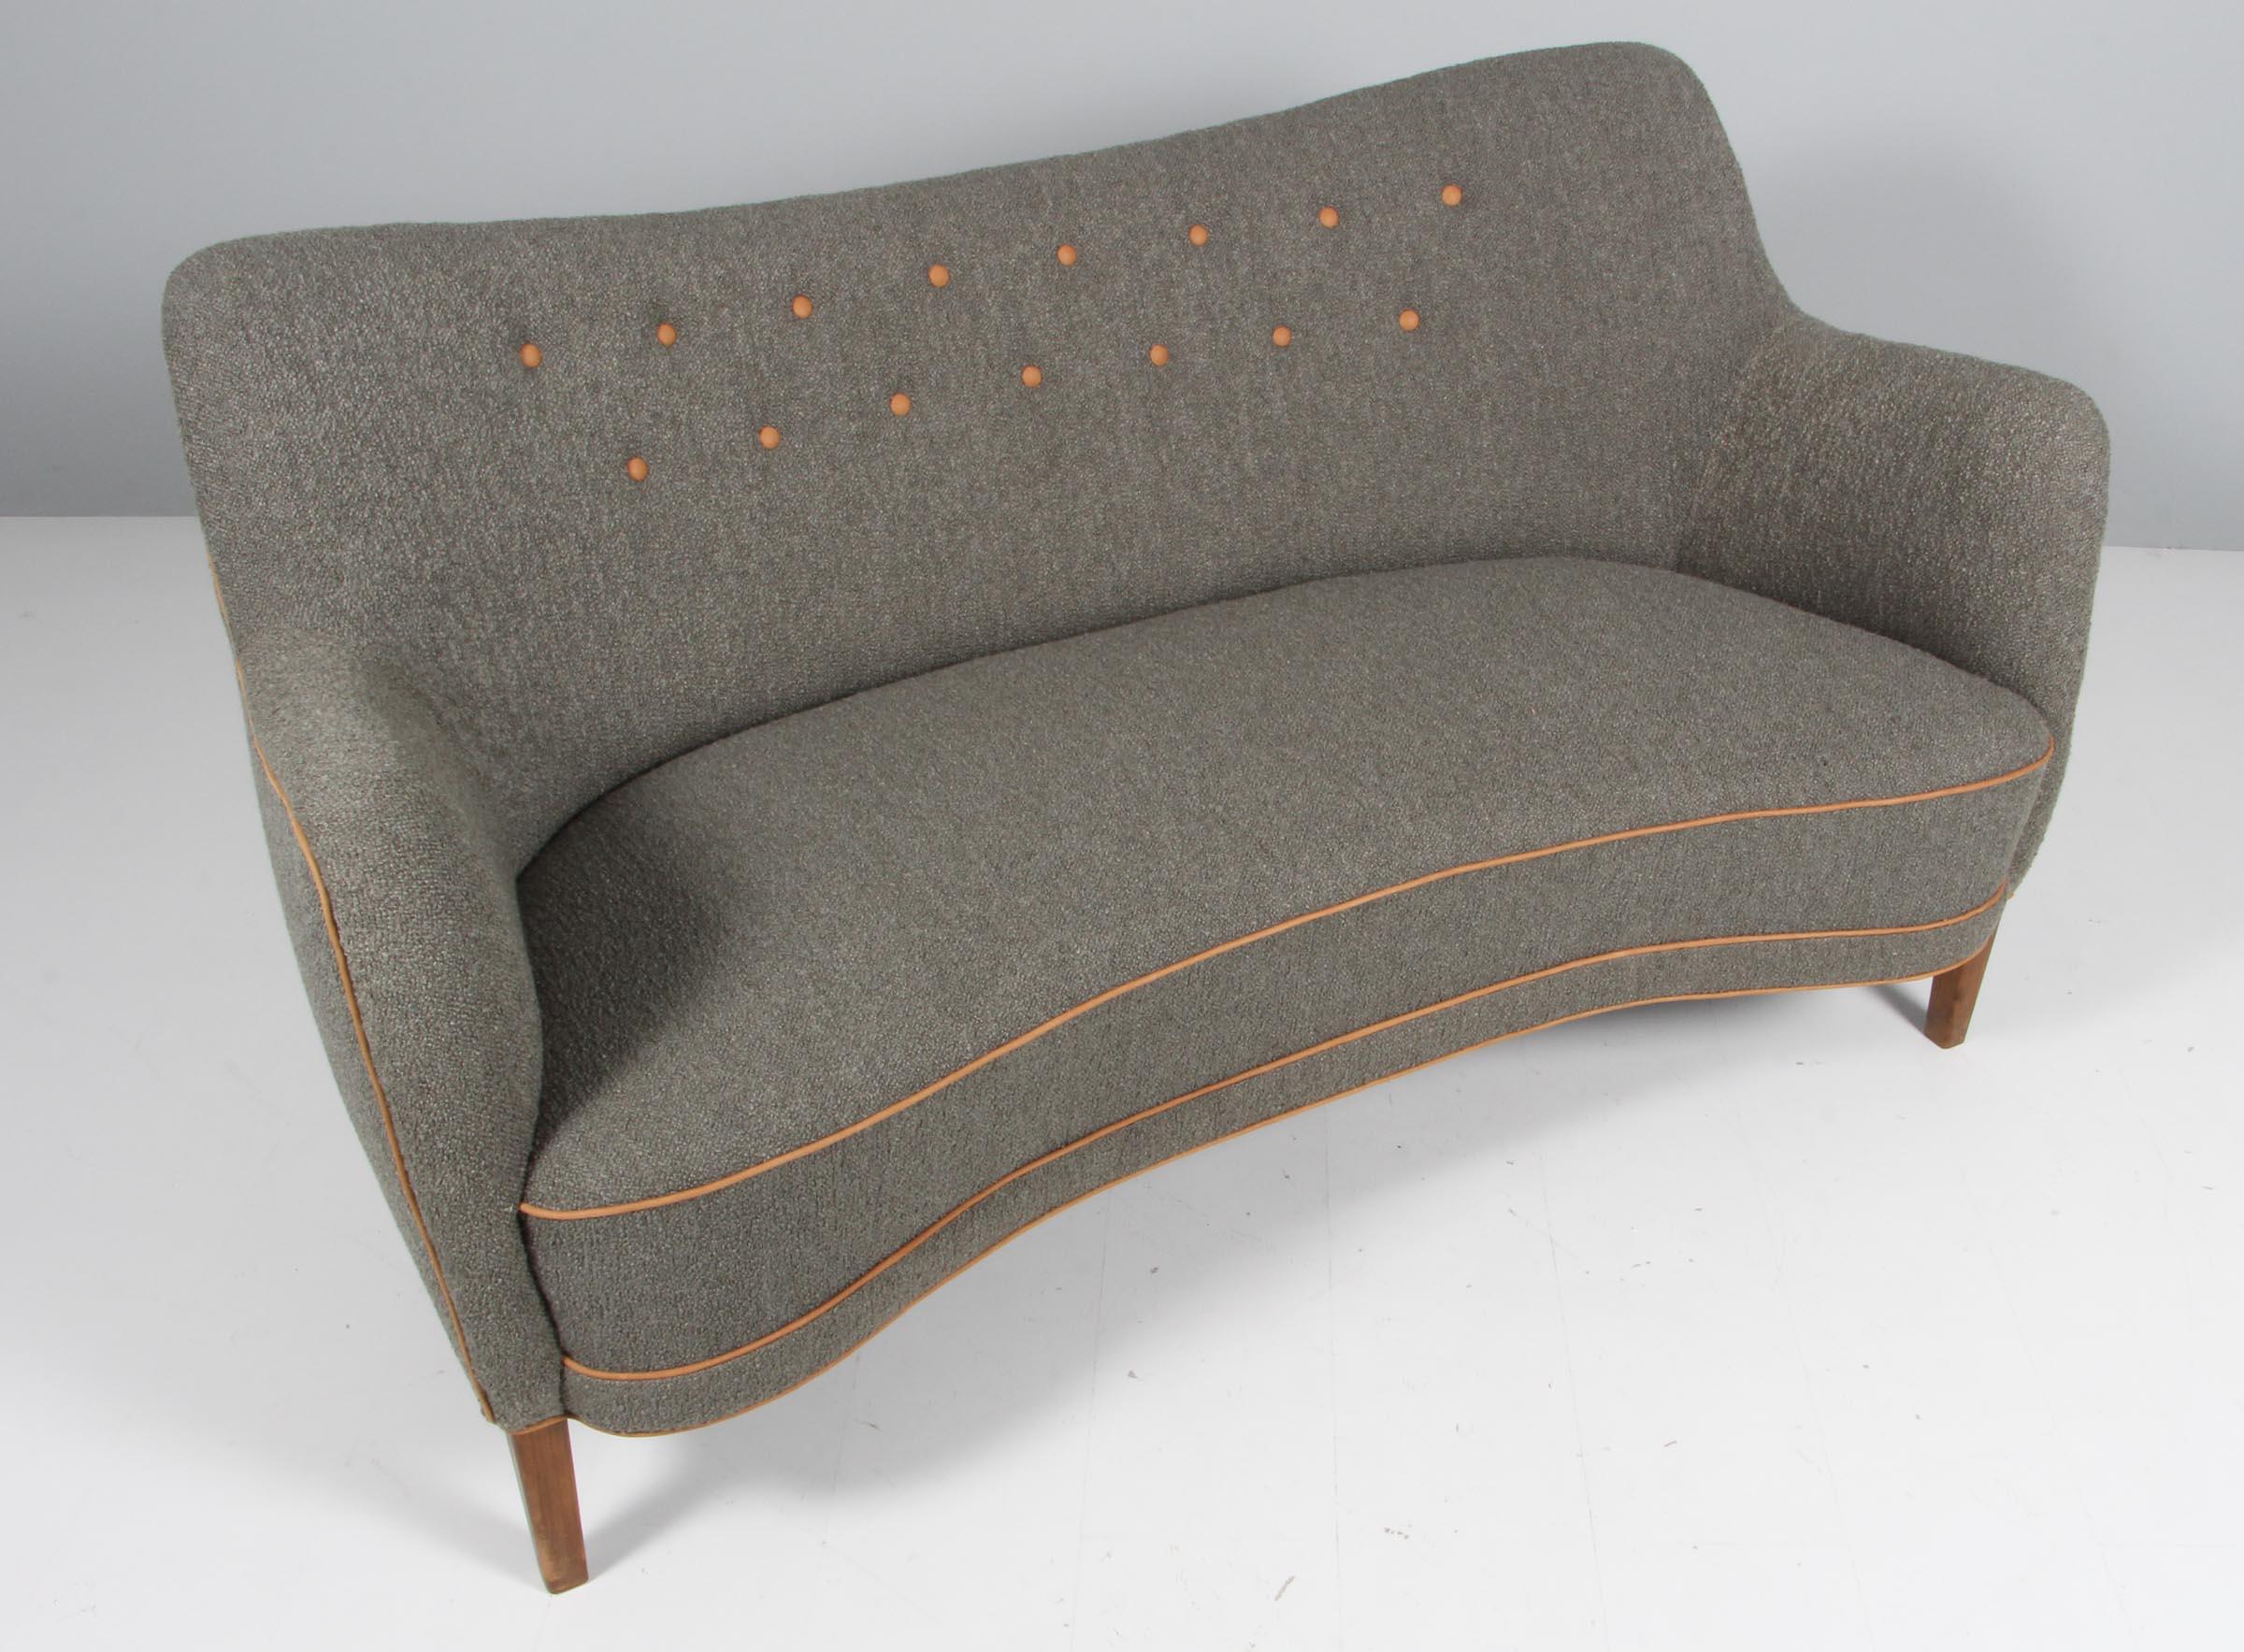 Slagelse Møbelværk two seat love sofa new upholstered with bouclé and cognac aniline tubing and buttons. 

Legs of stained beech.

This sofa is made in the 1950s and is made in the style of Finn Juhl.